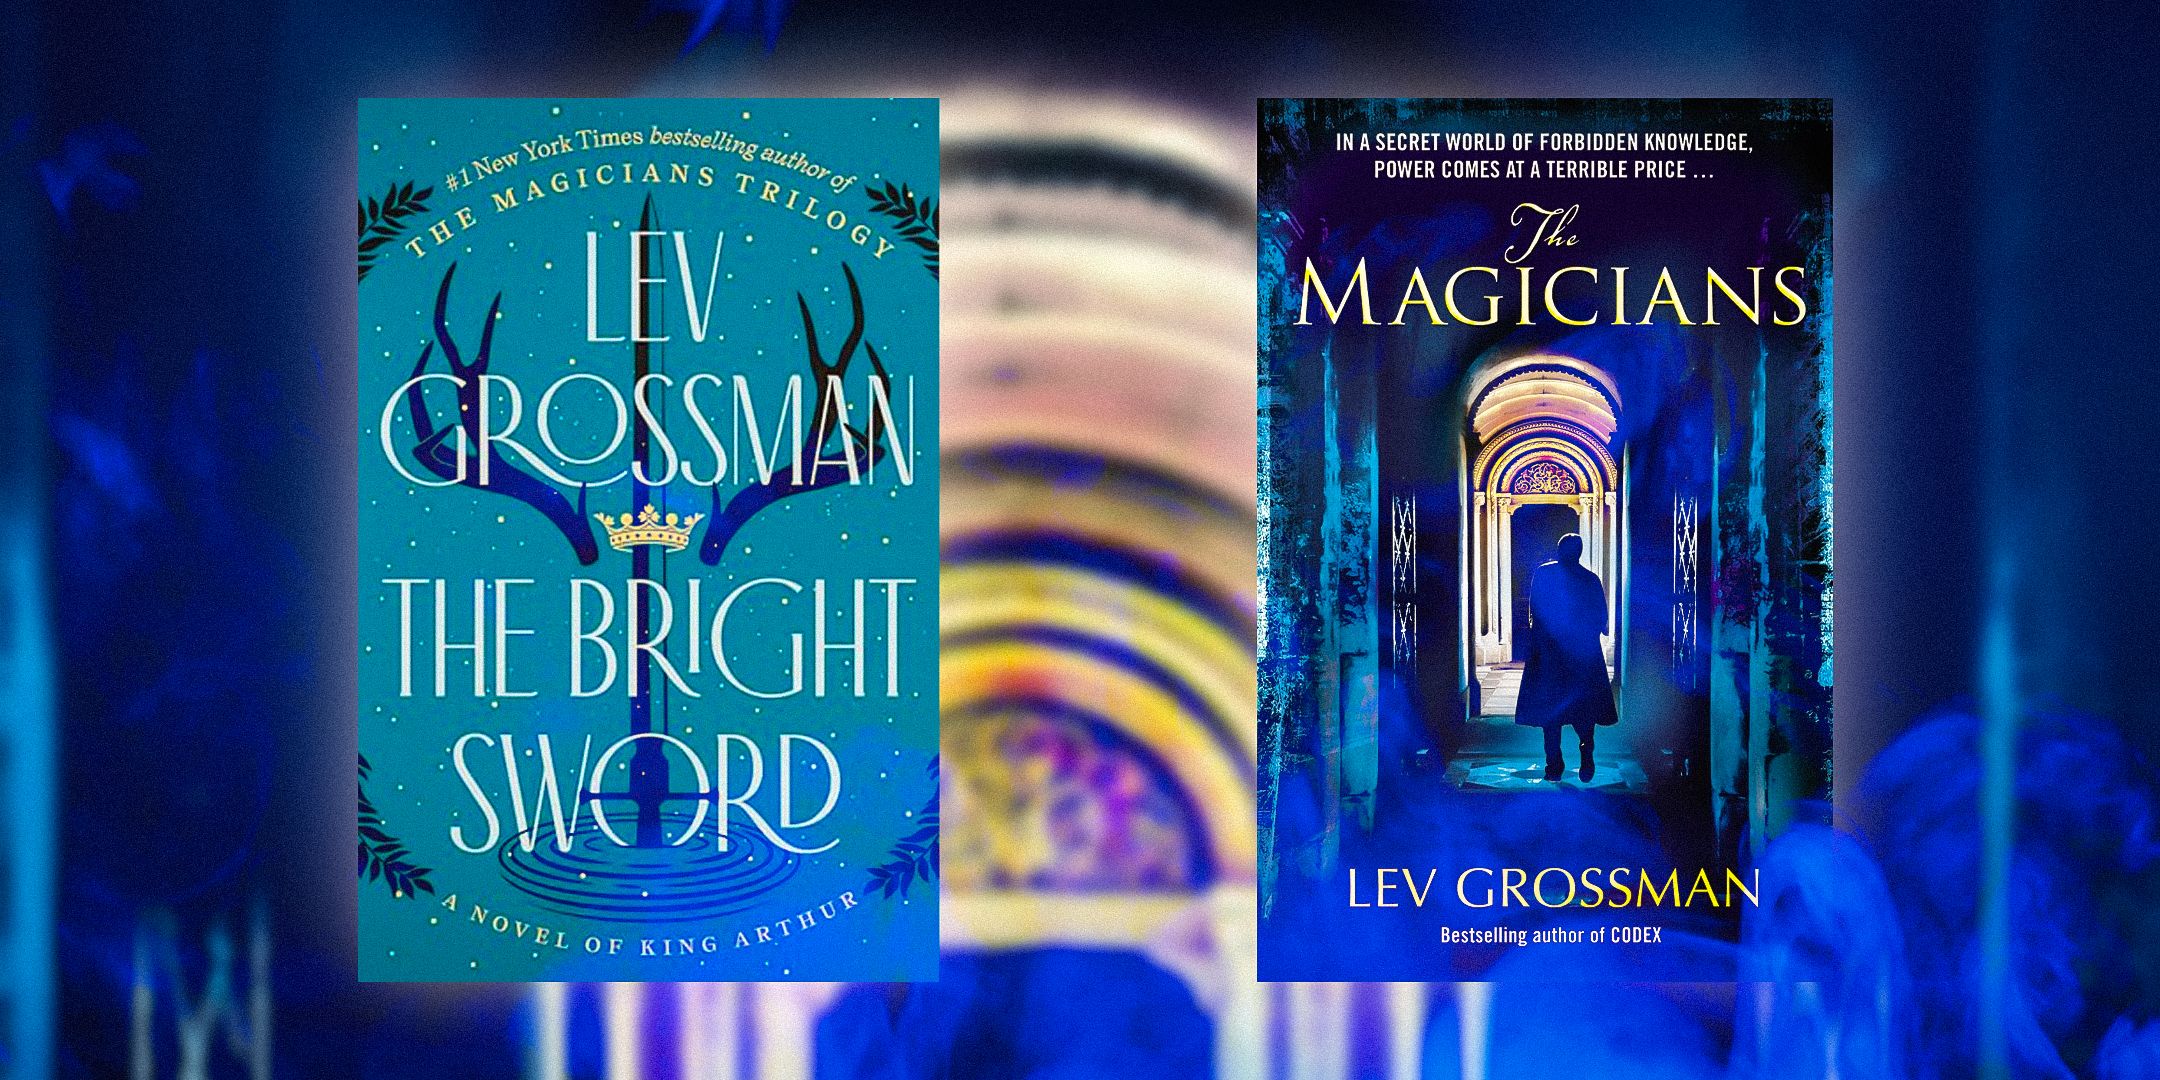 Lev Grossman’s new fantasy book continues a major trend in the Magicians trilogy